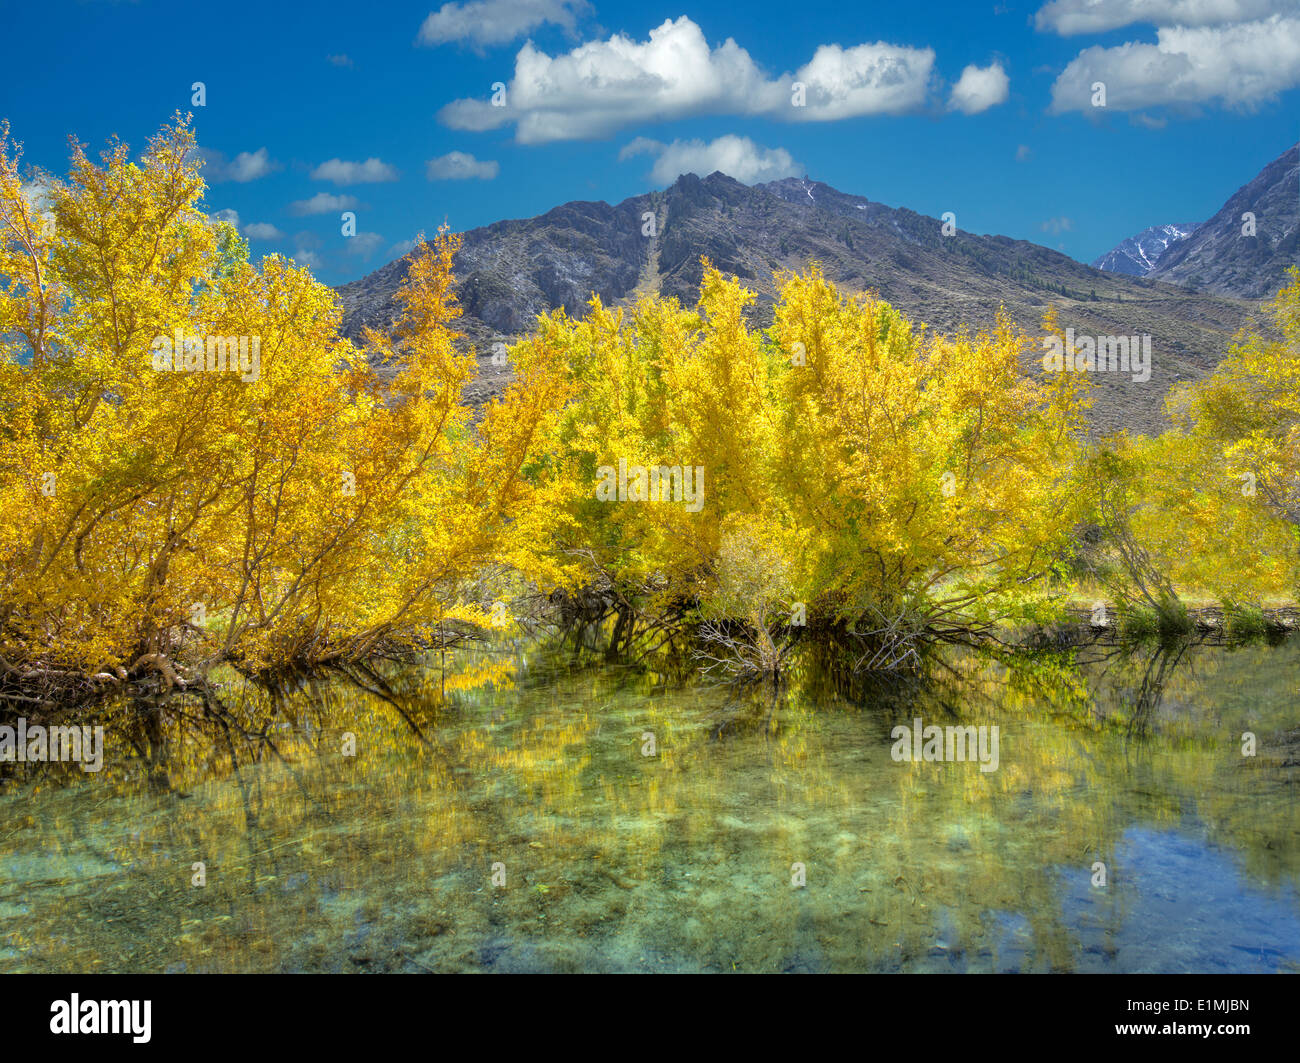 Small beaver pond on McGee Creek with fall color. Eastern Sirra Nevada mountains, California Stock Photo